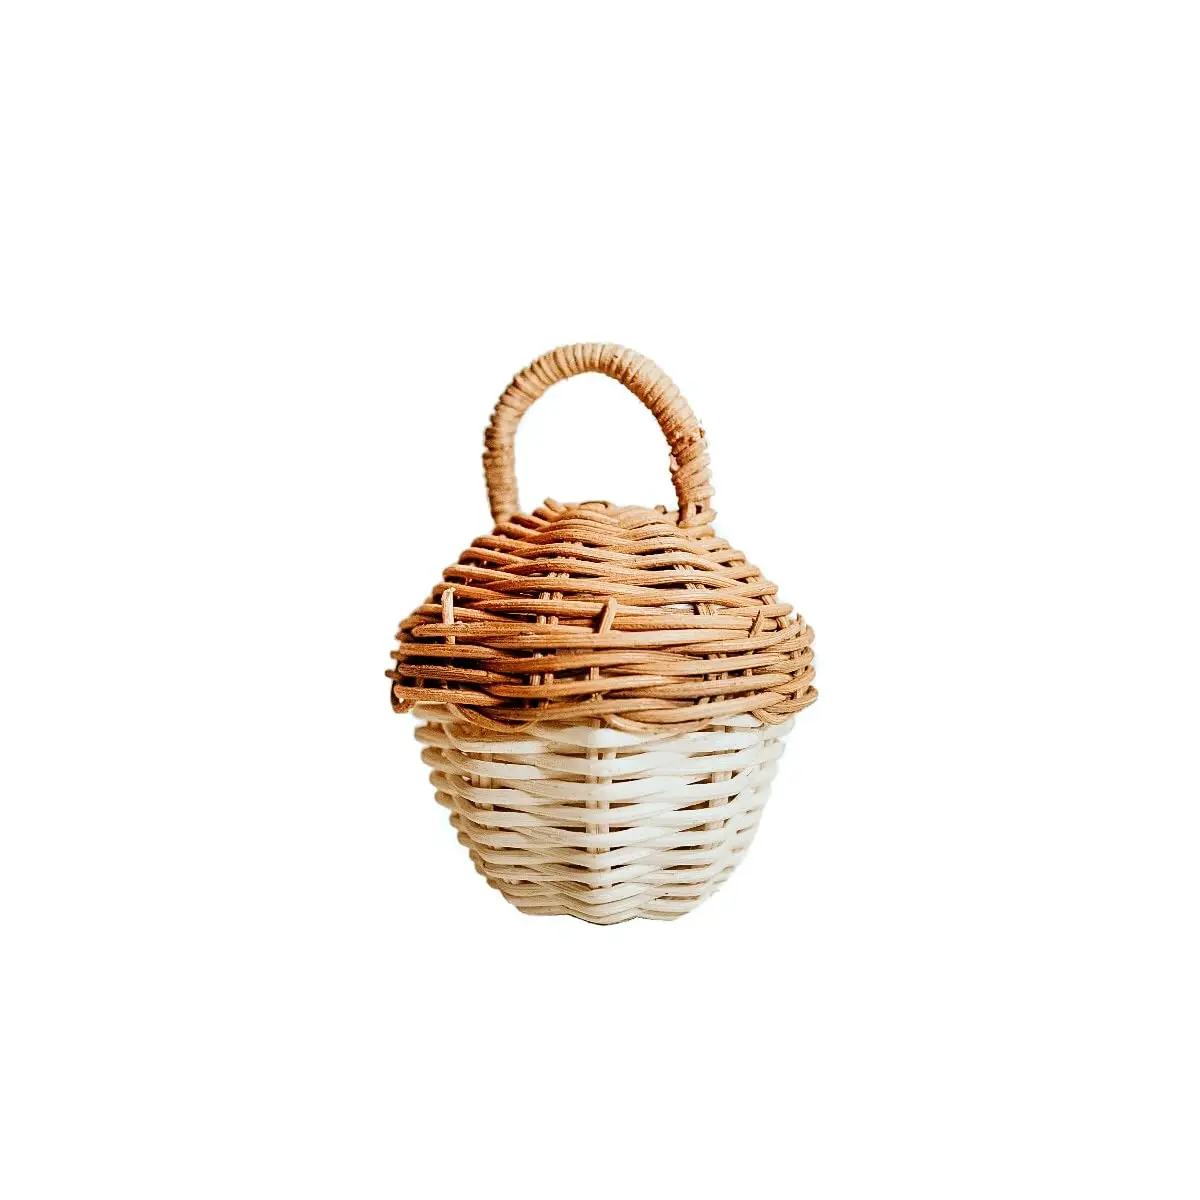 Best Wholesale Bamboo Rattan Baby Furniture Baby Rattle Toy Durable Handwoven Baby Room Decor